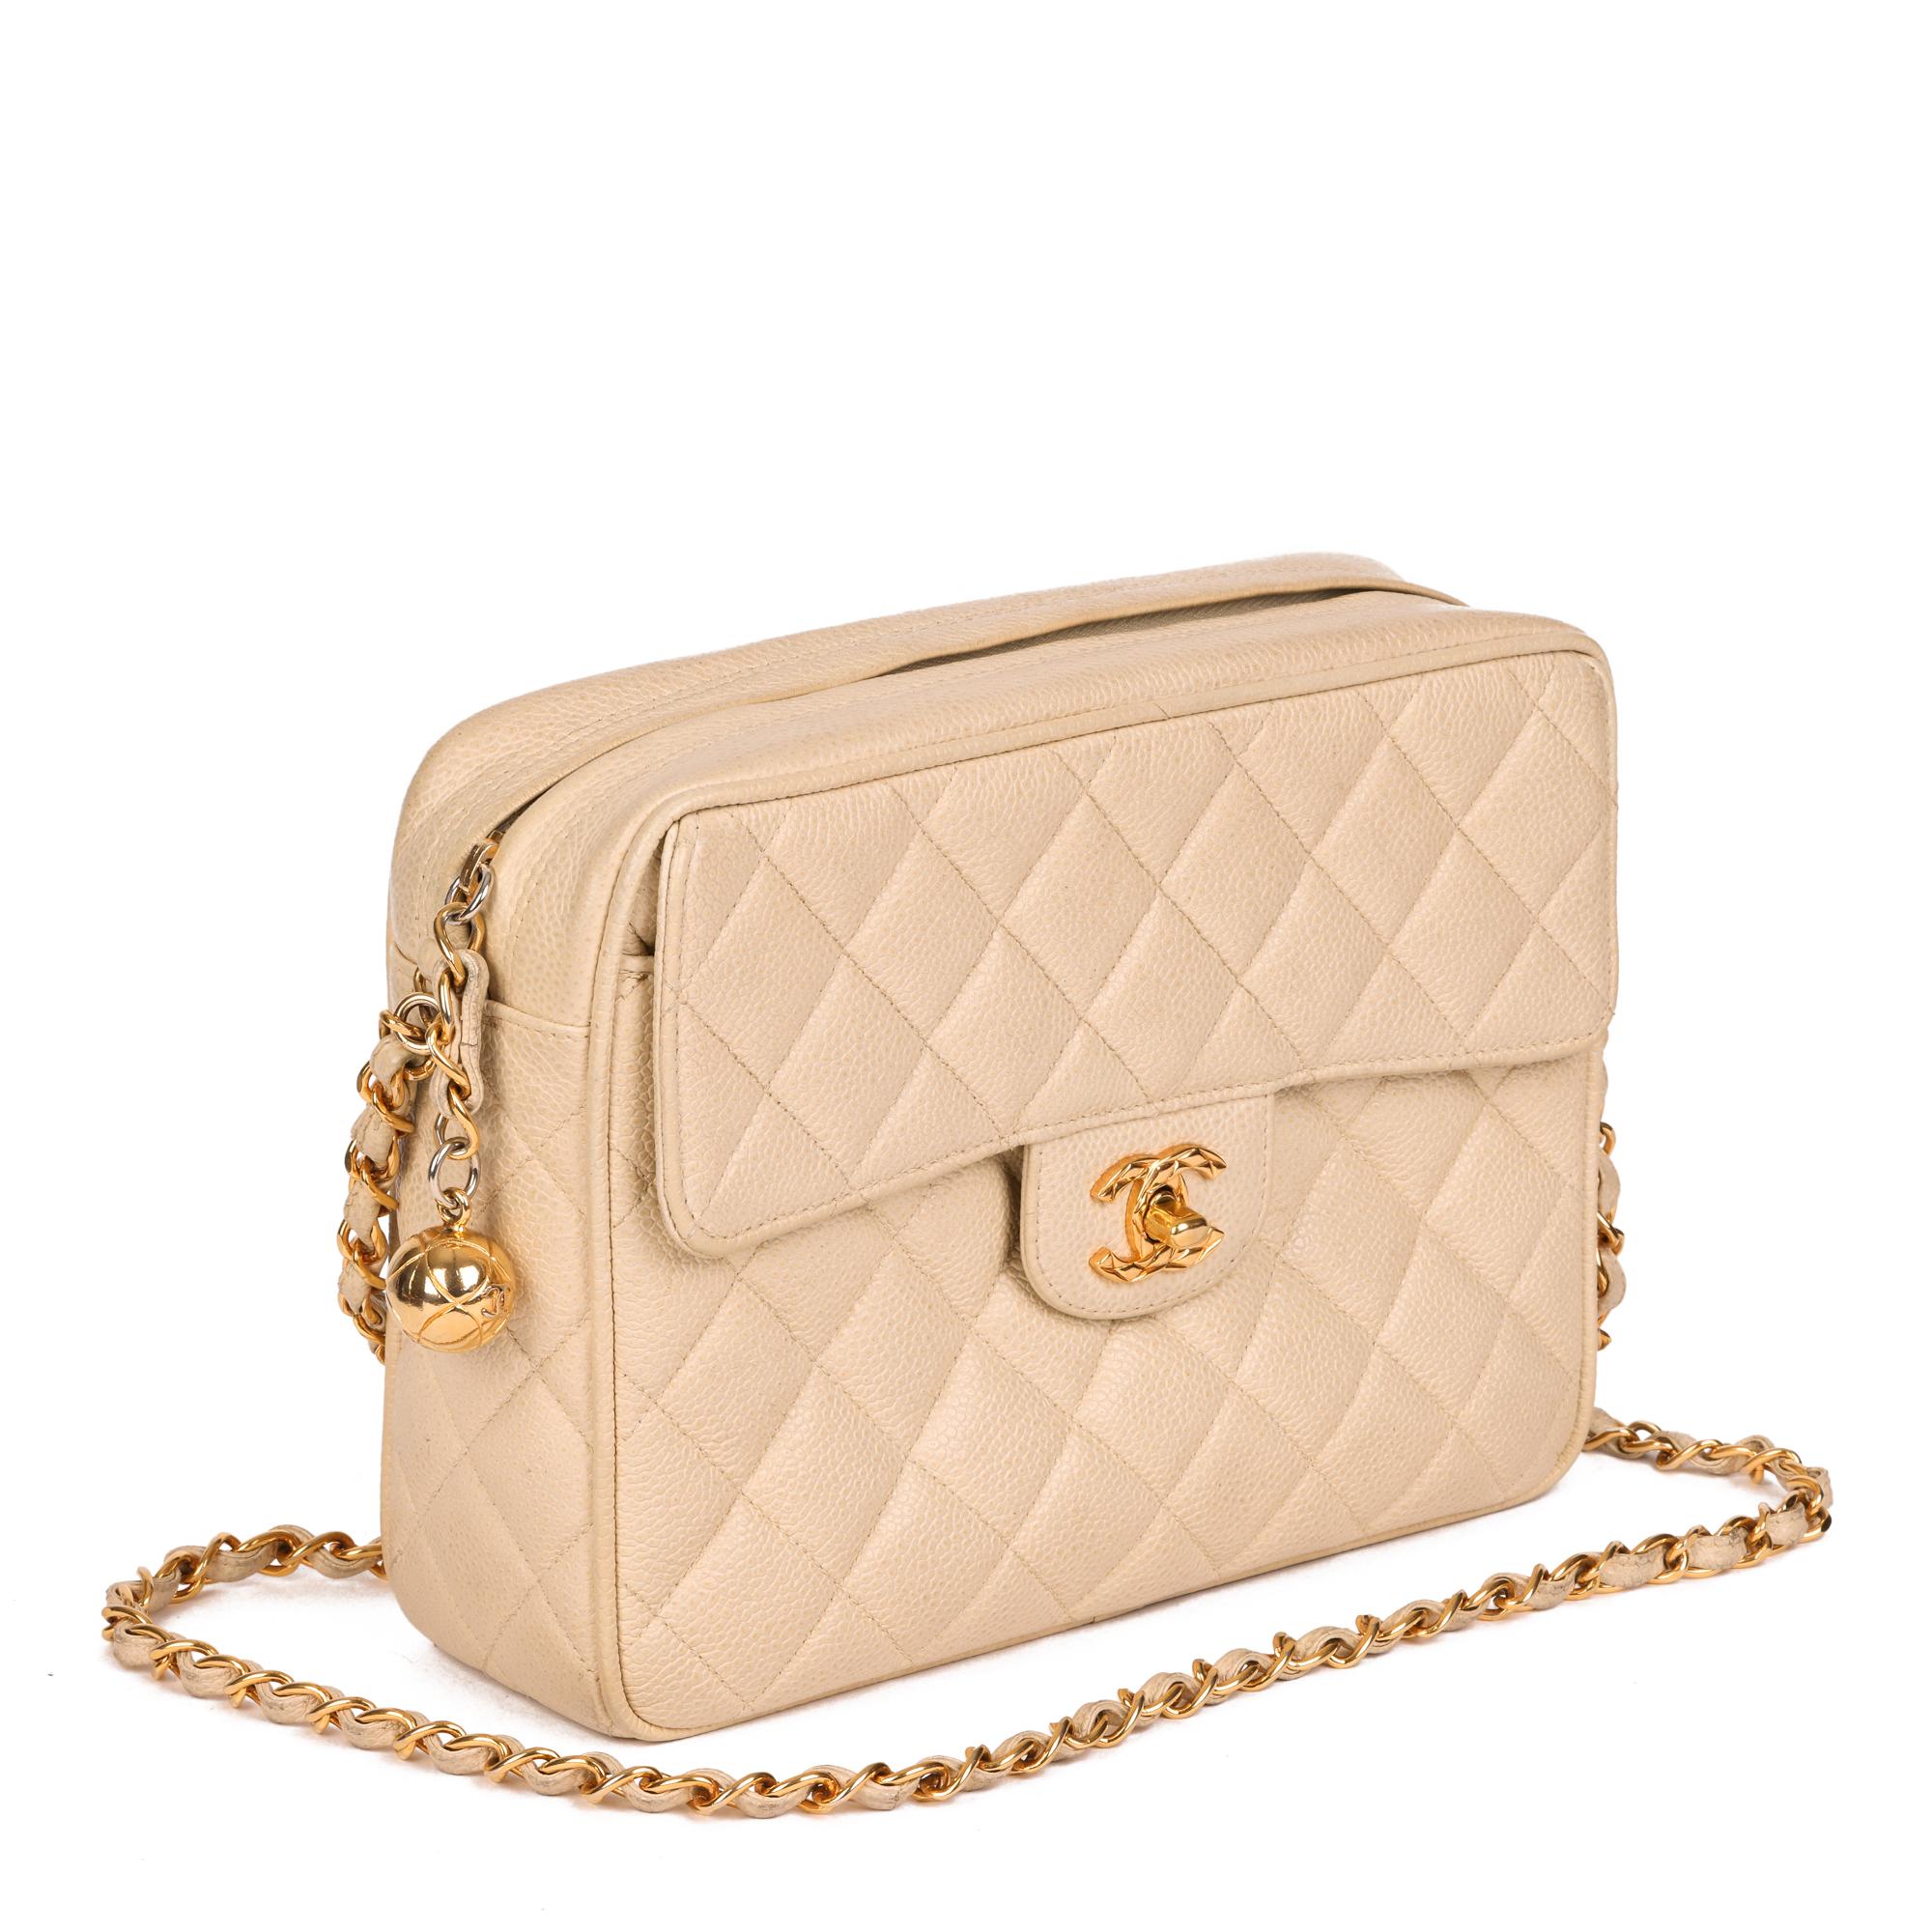 CHANEL
Beige Quilted Caviar Leather Vintage Small Classic Camera Bag

Serial Number: 3240167
Age (Circa): 1994
Accompanied By: Chanel Dust Bag
Authenticity Details: Serial Sticker (Made in France)
Gender: Ladies
Type: Shoulder, Crossbody

Colour: